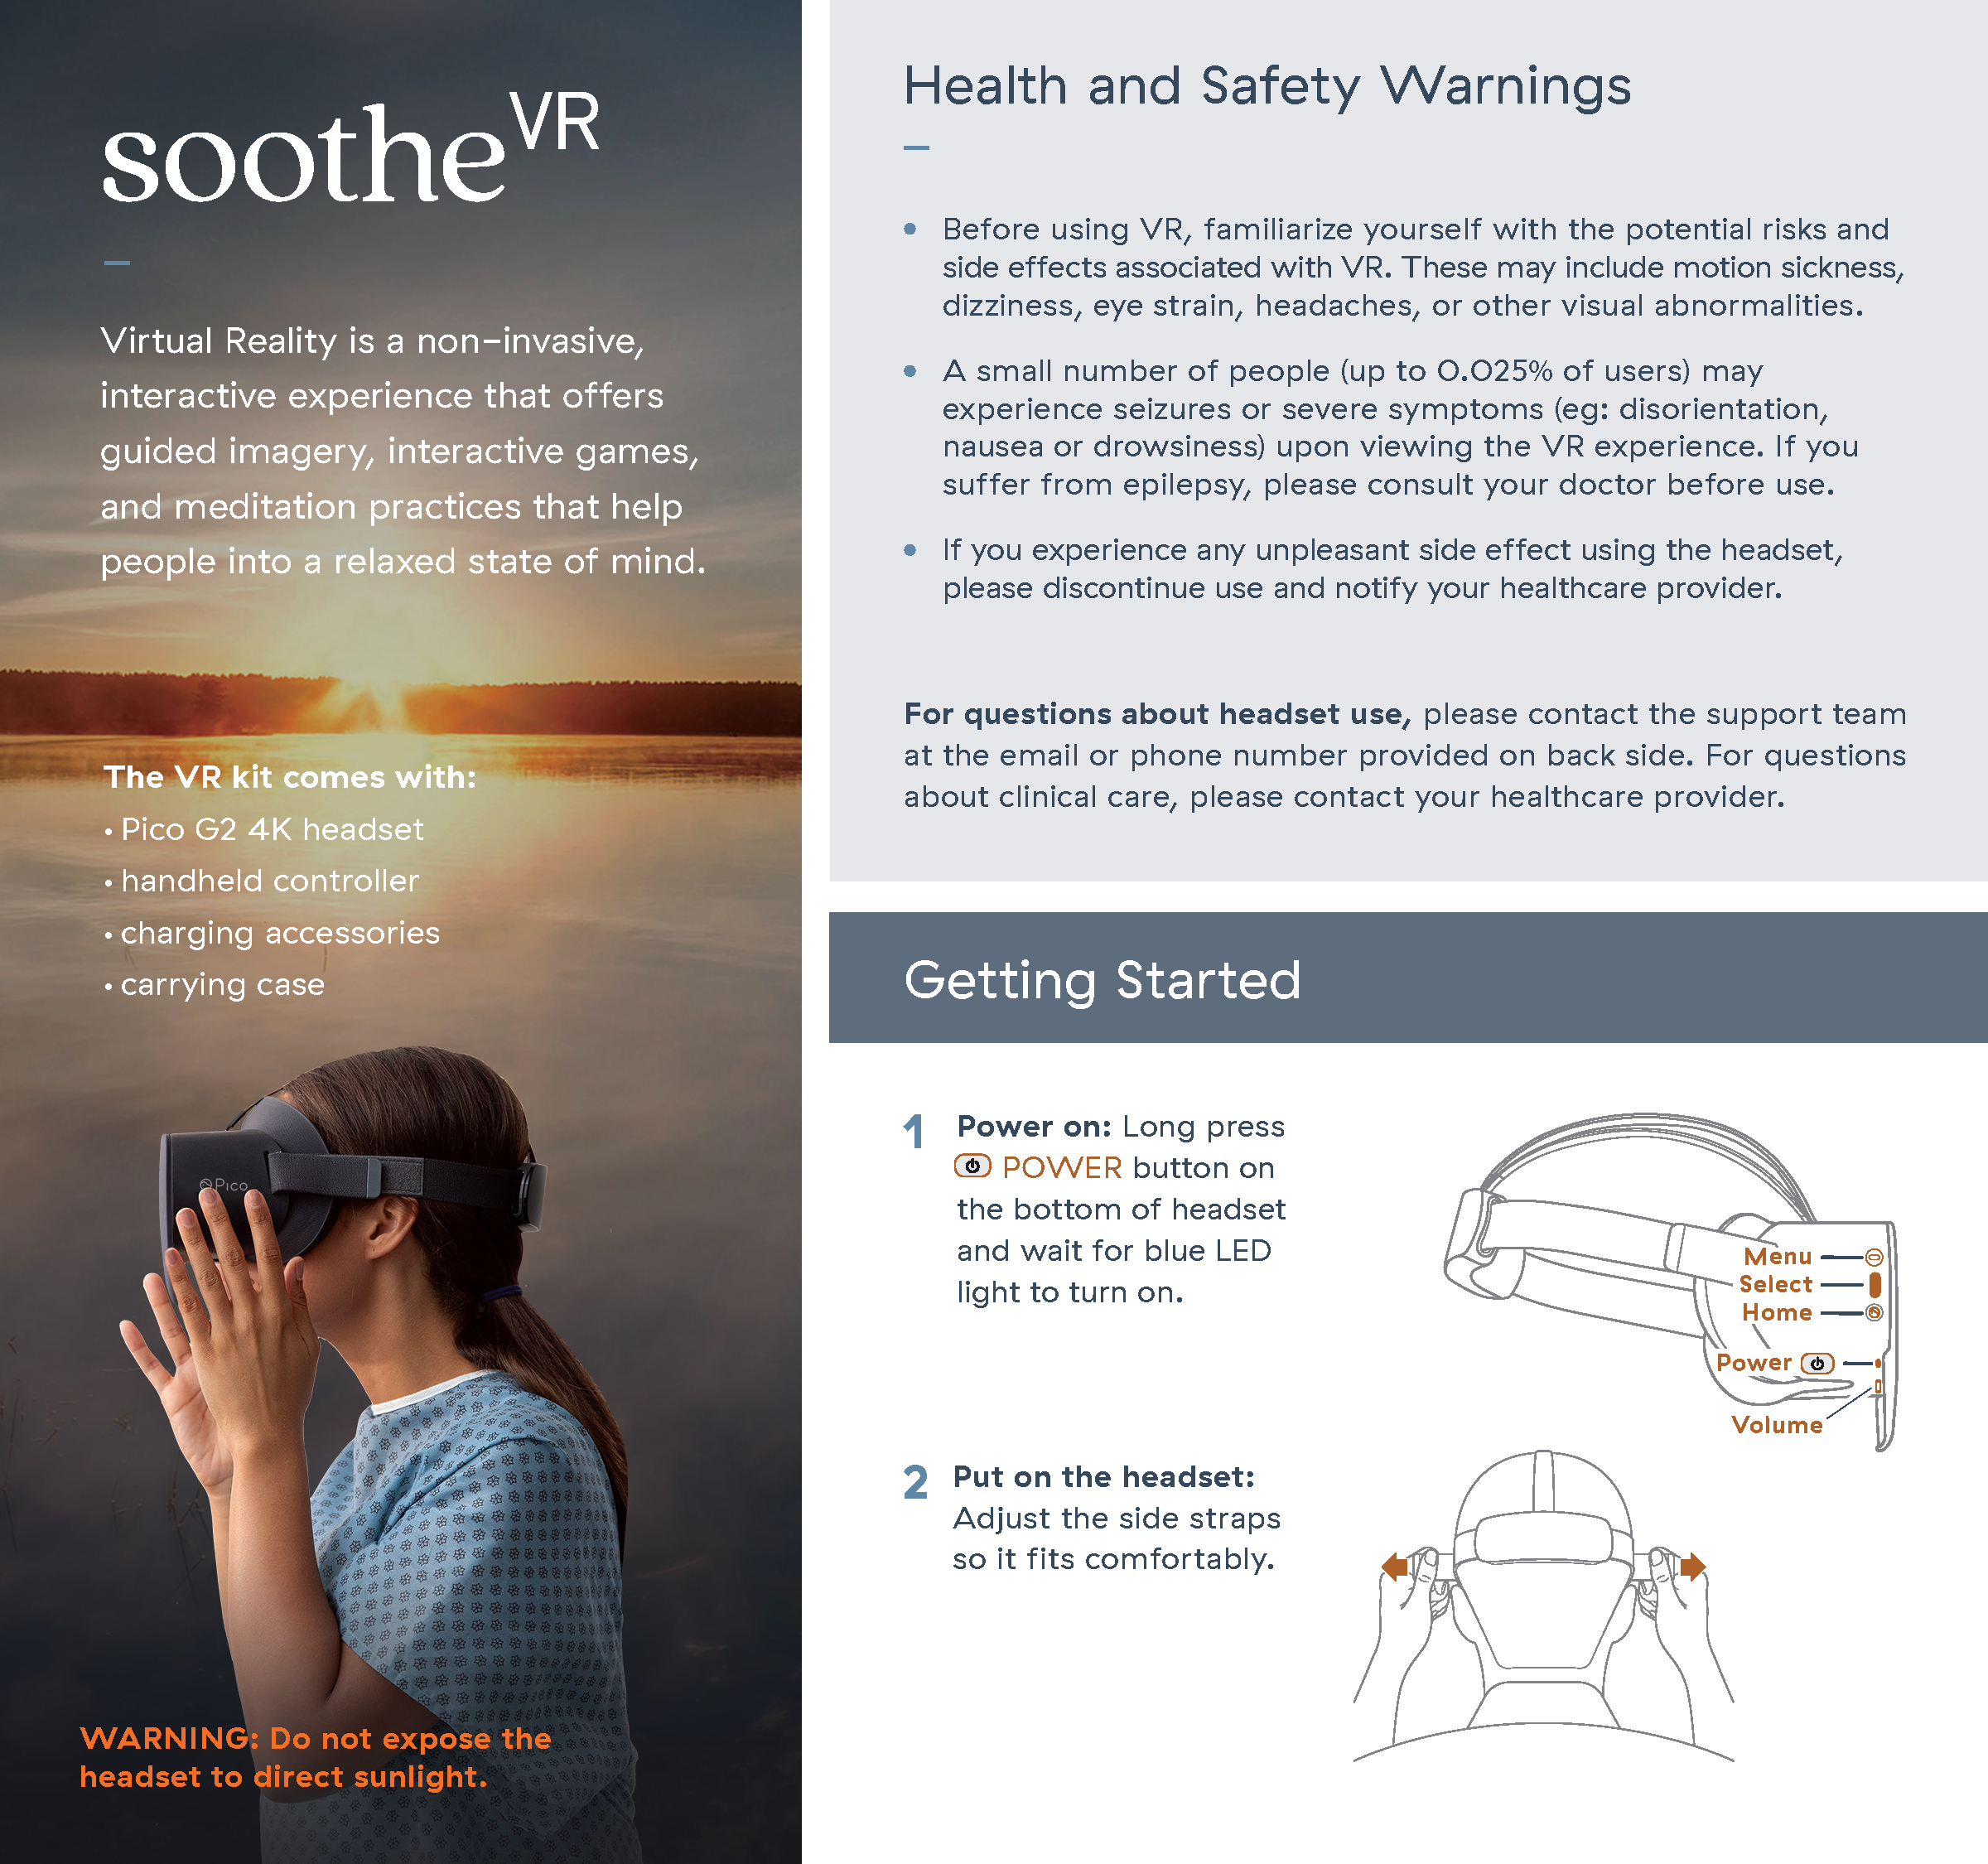 AVR20_SootheVR_2.0_Wellness_QuickGuide_ELECTRONIC_USE_02_Page_1.png